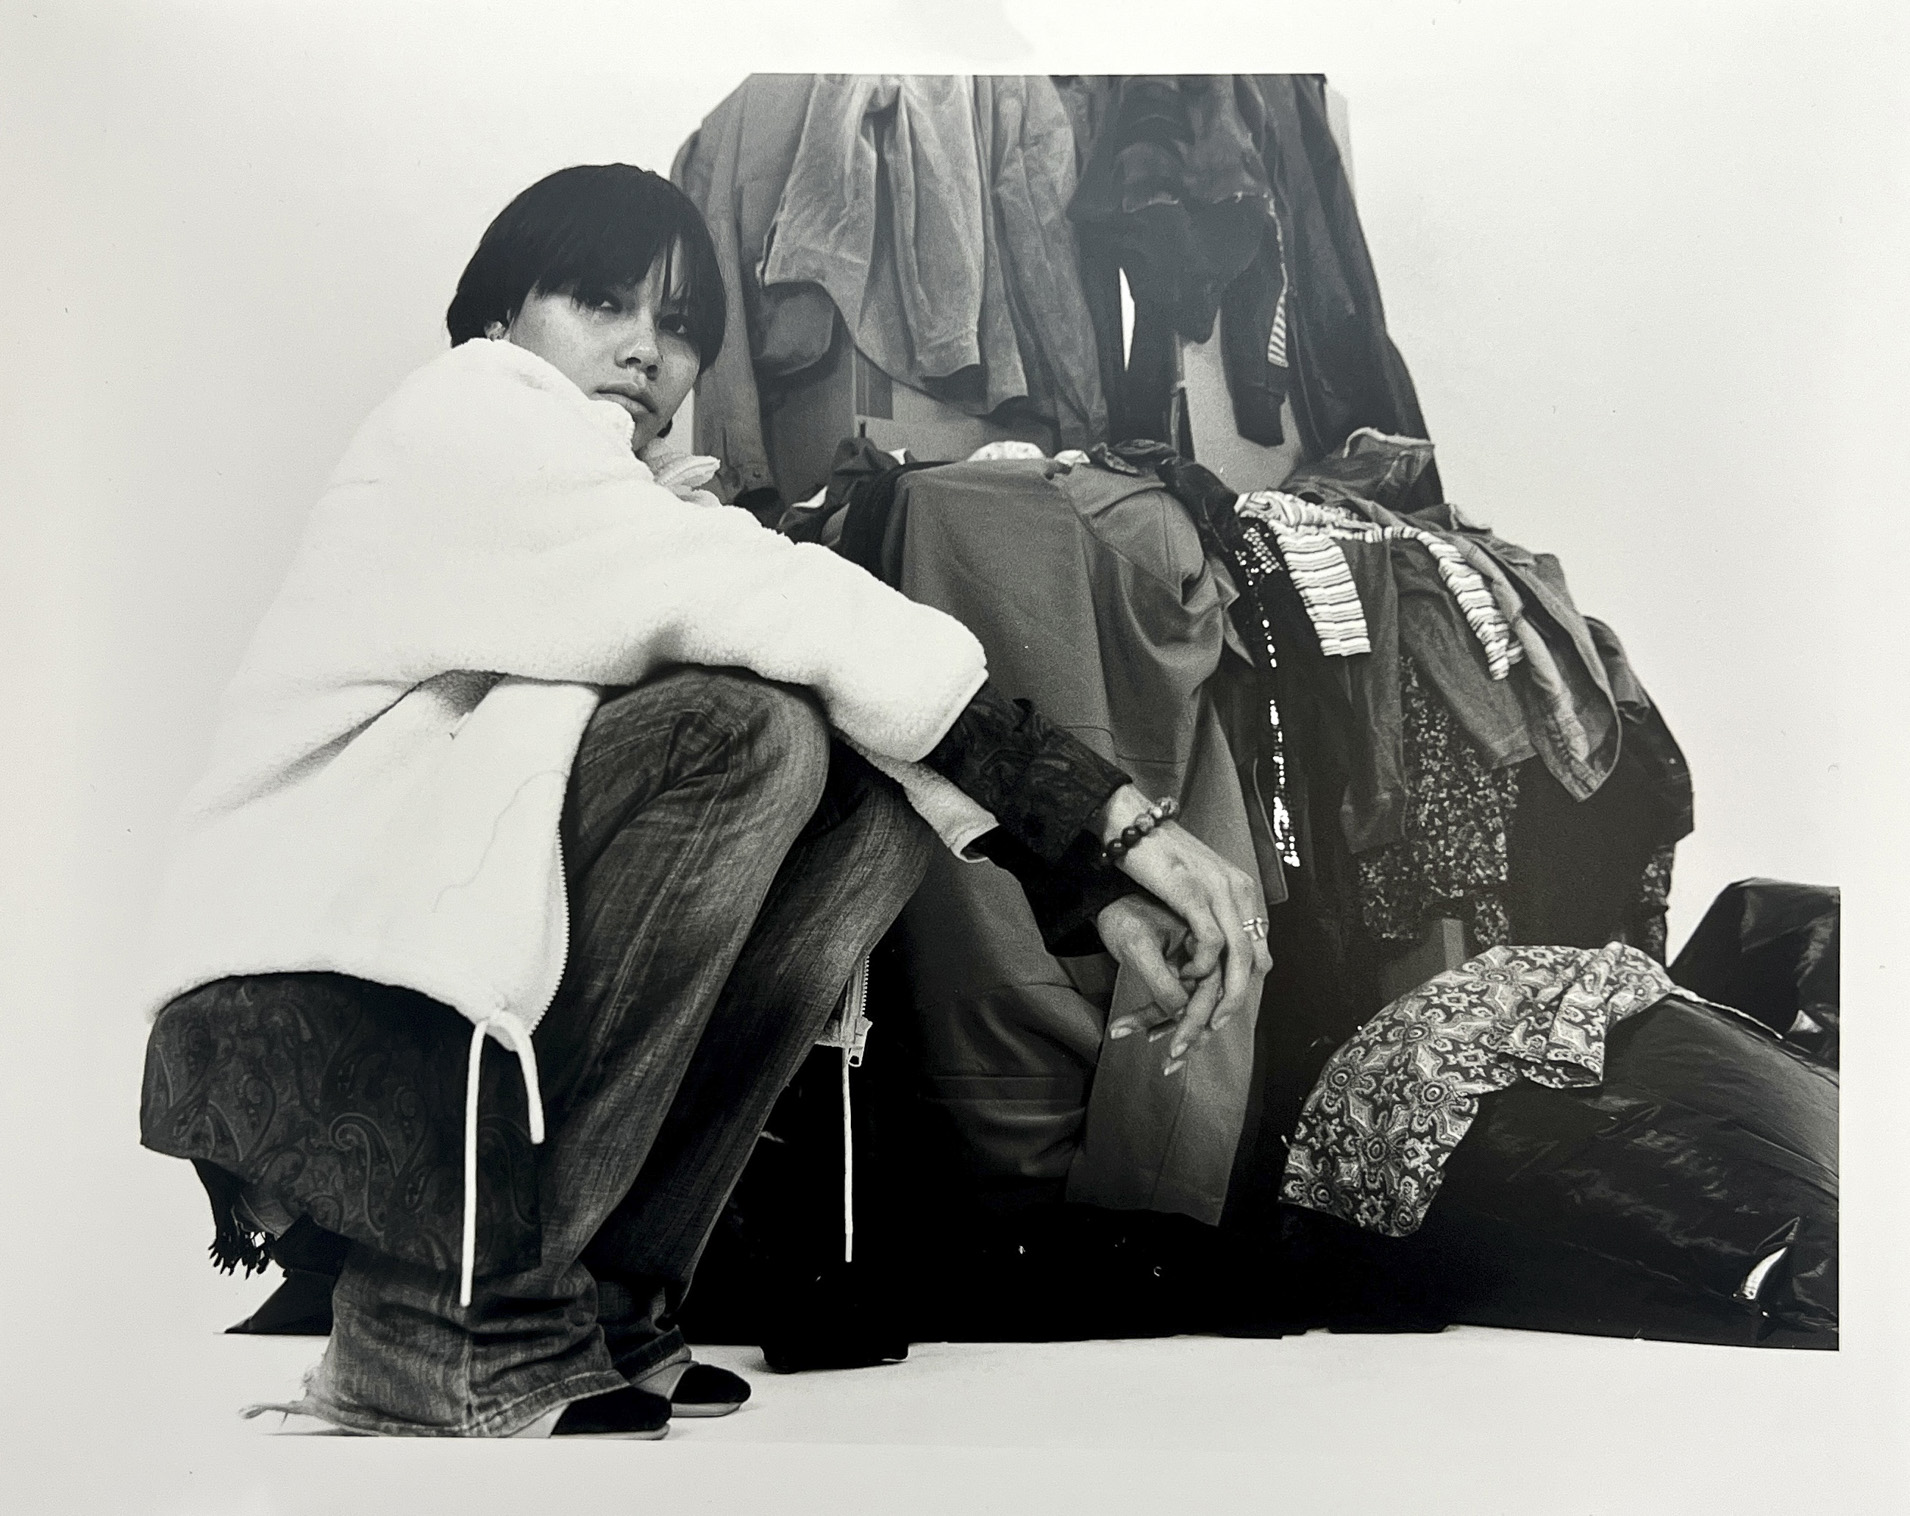 A person kneels near many pieces of clothes